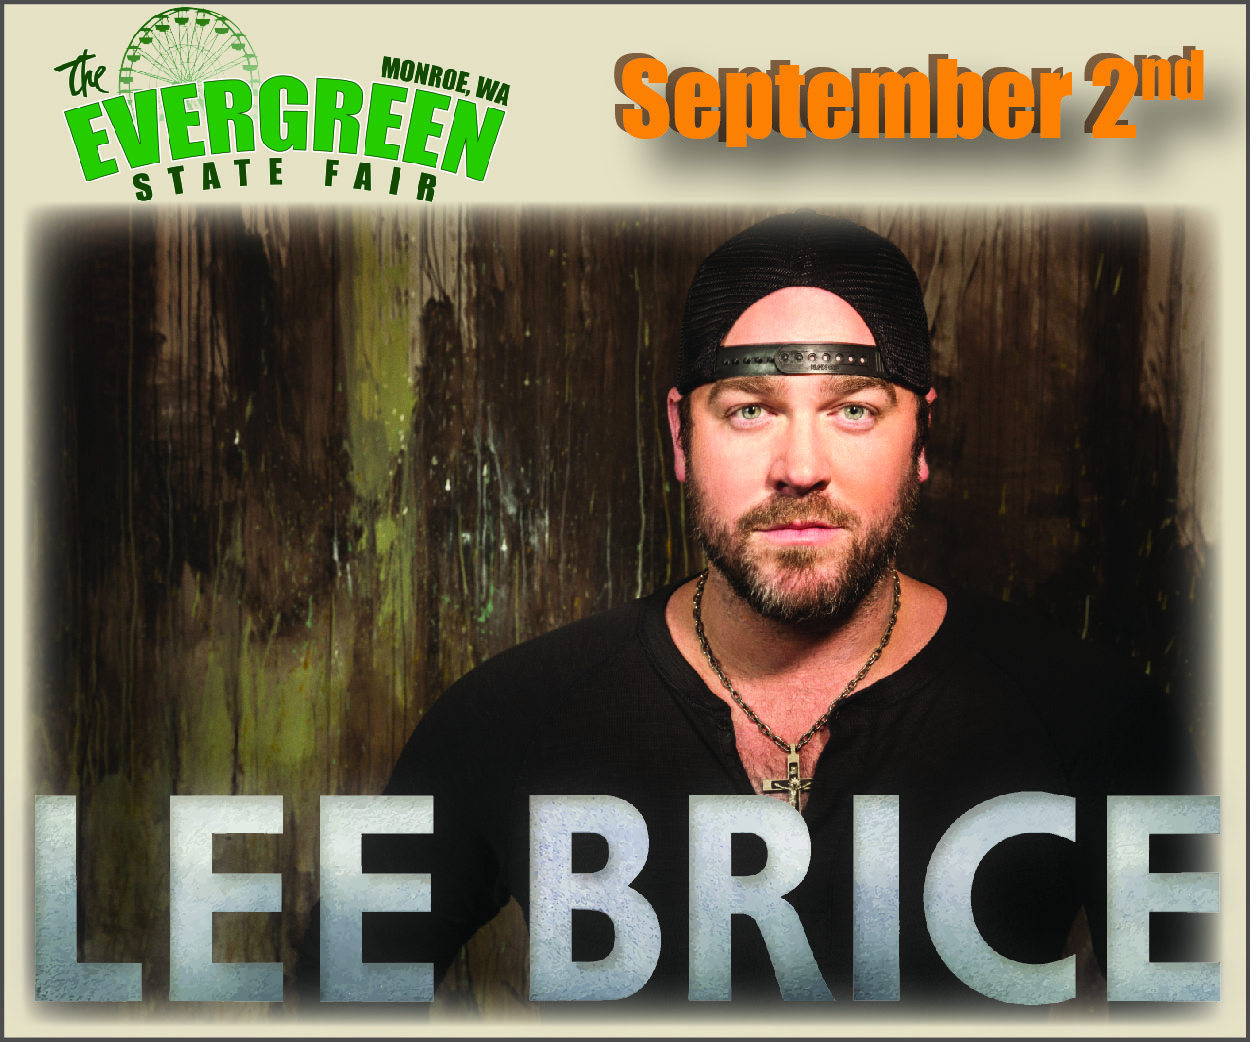 Lee Brice At The Evergreen State Fair Ticket PreSale! CW Seattle